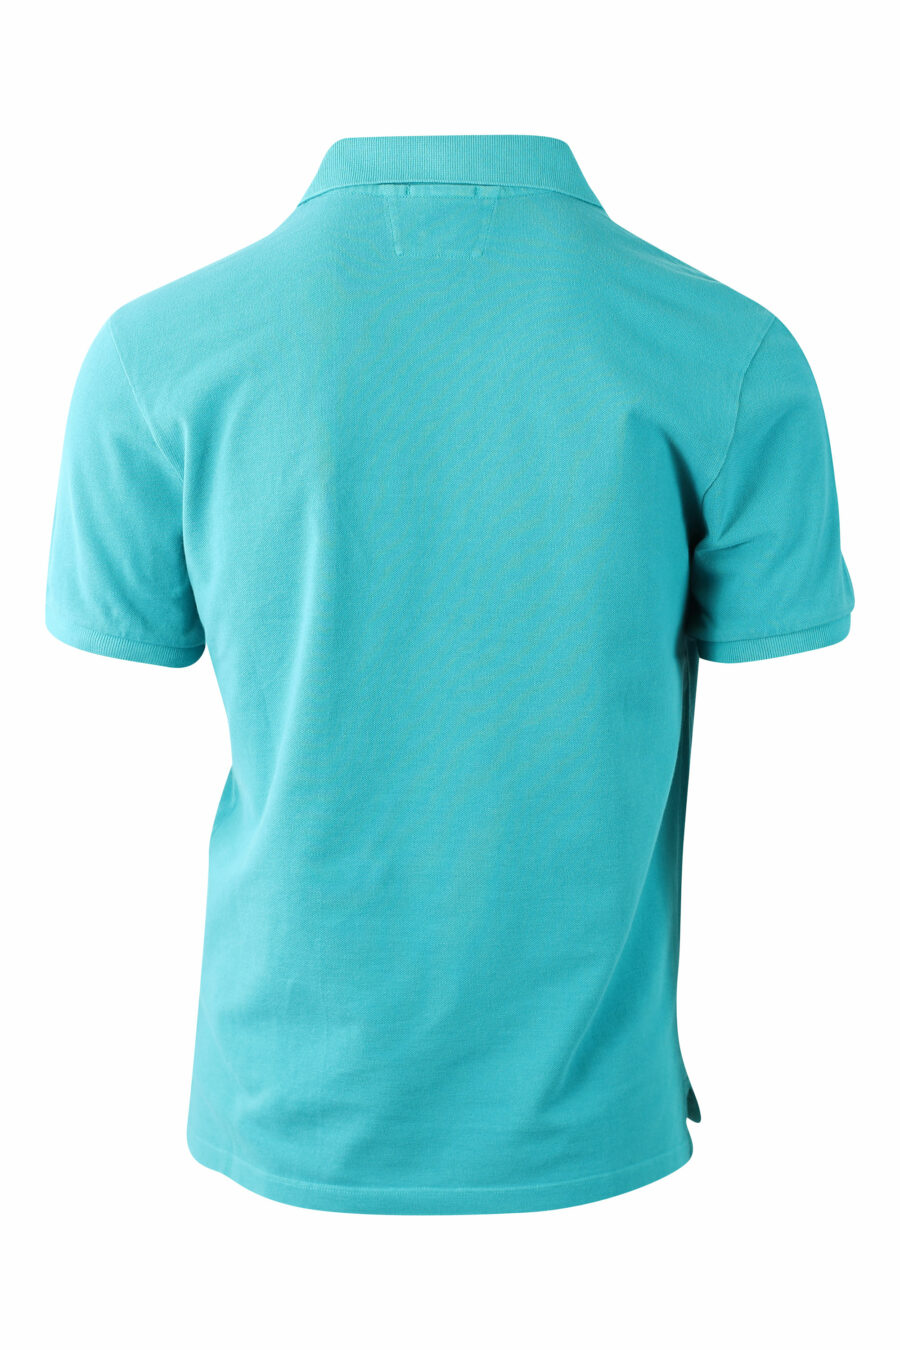 Turquoise polo shirt with mini logo patch - IMG 0057 1